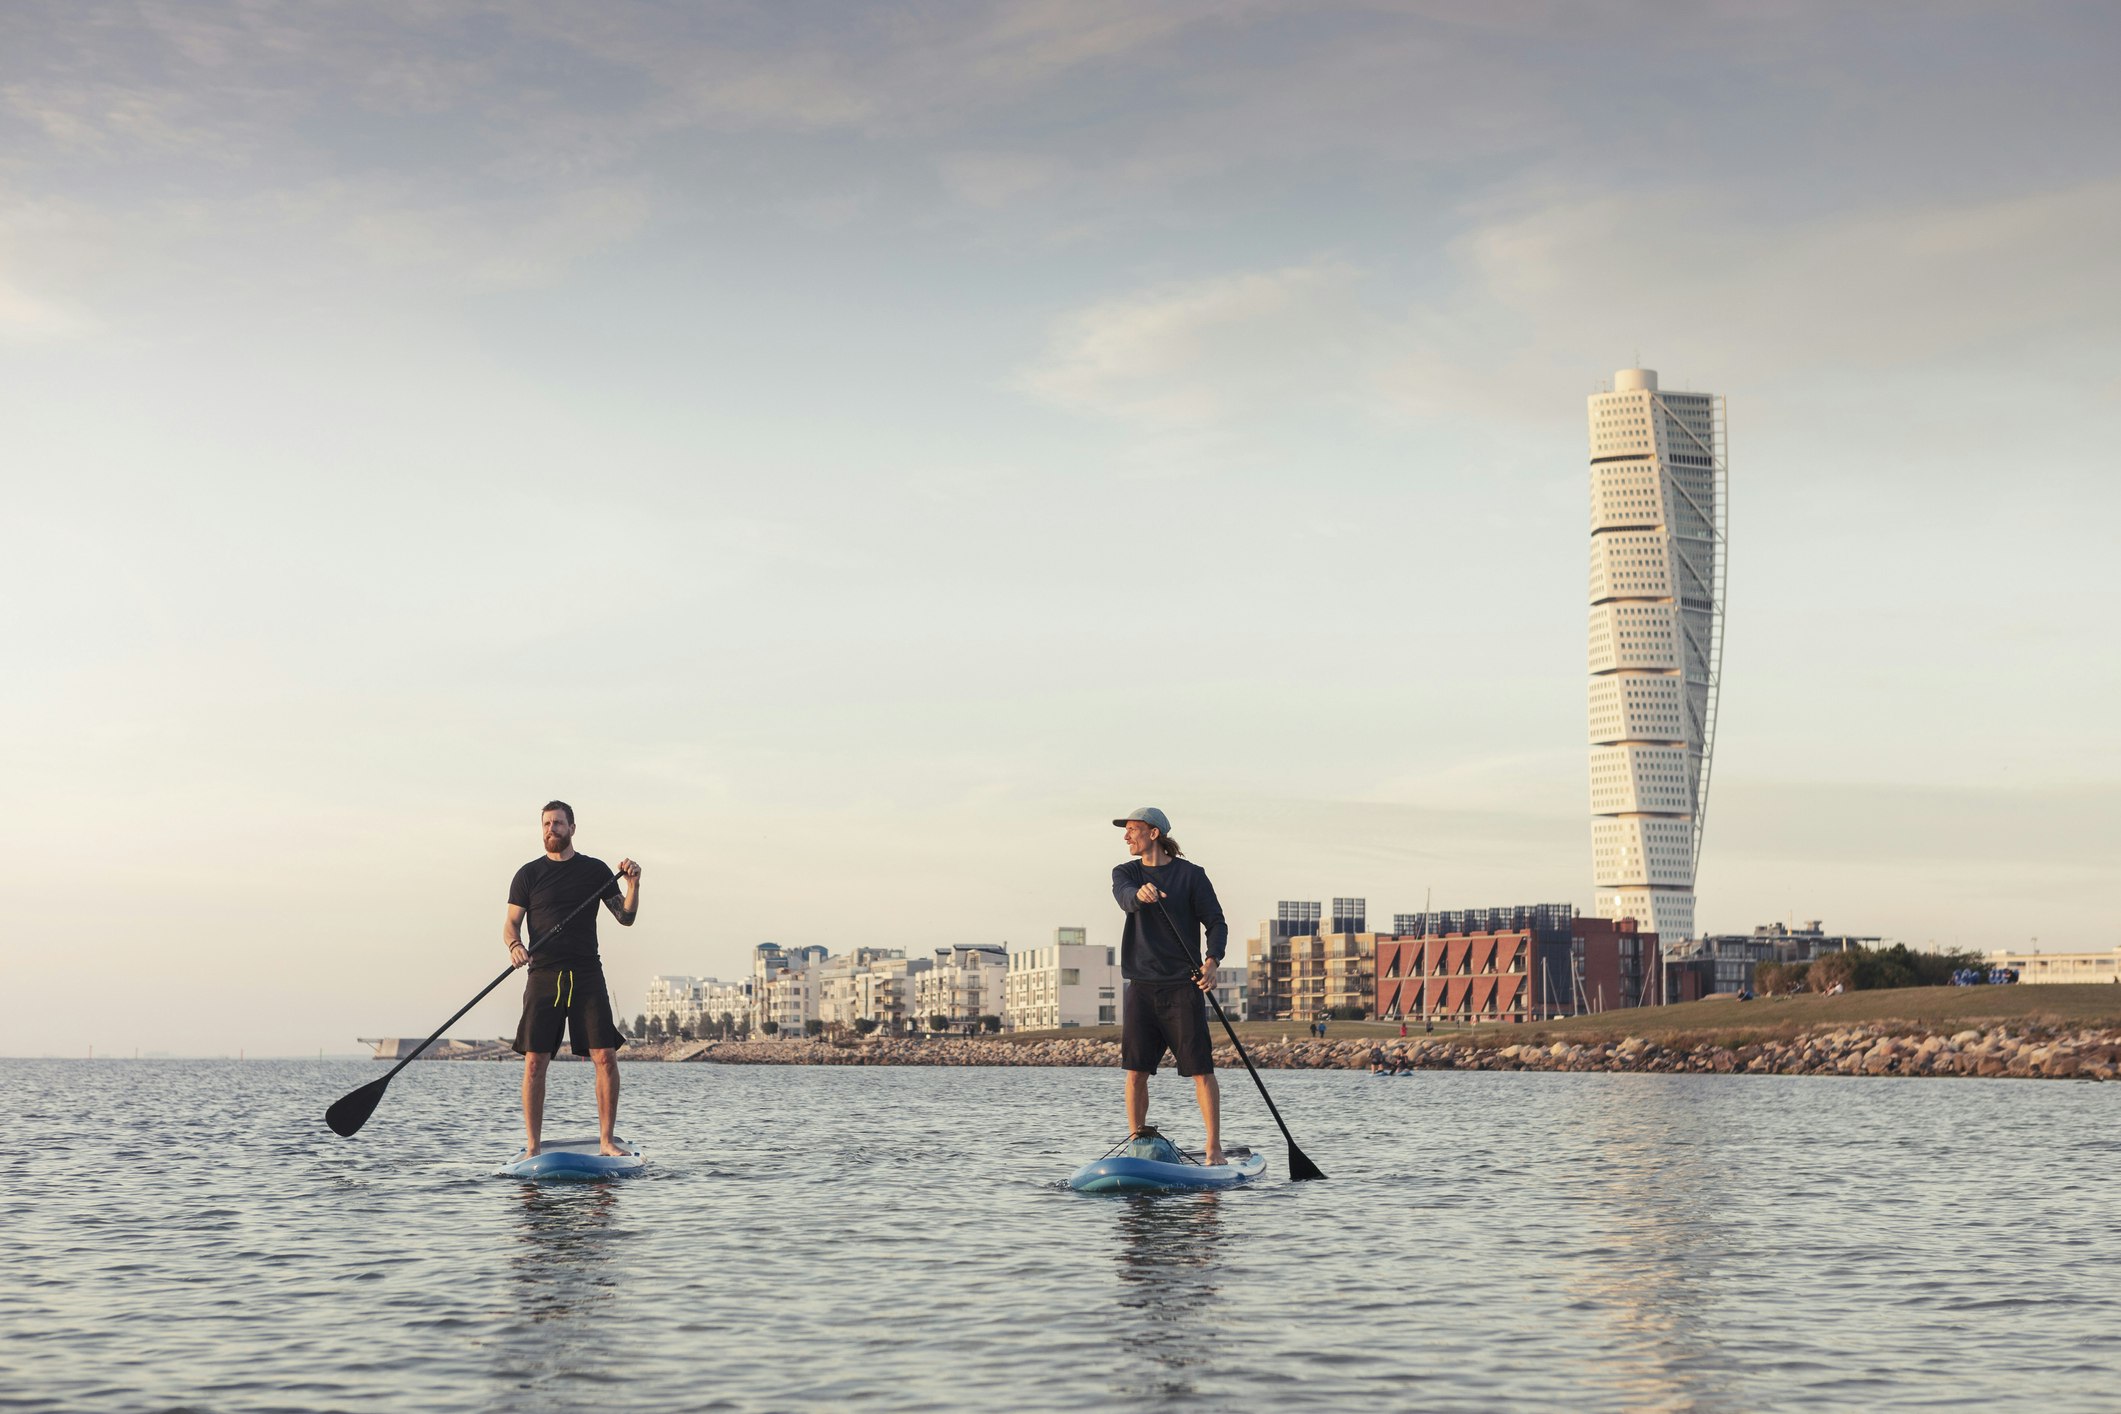 Two friends paddle boarding in front of the Turning Torso tower